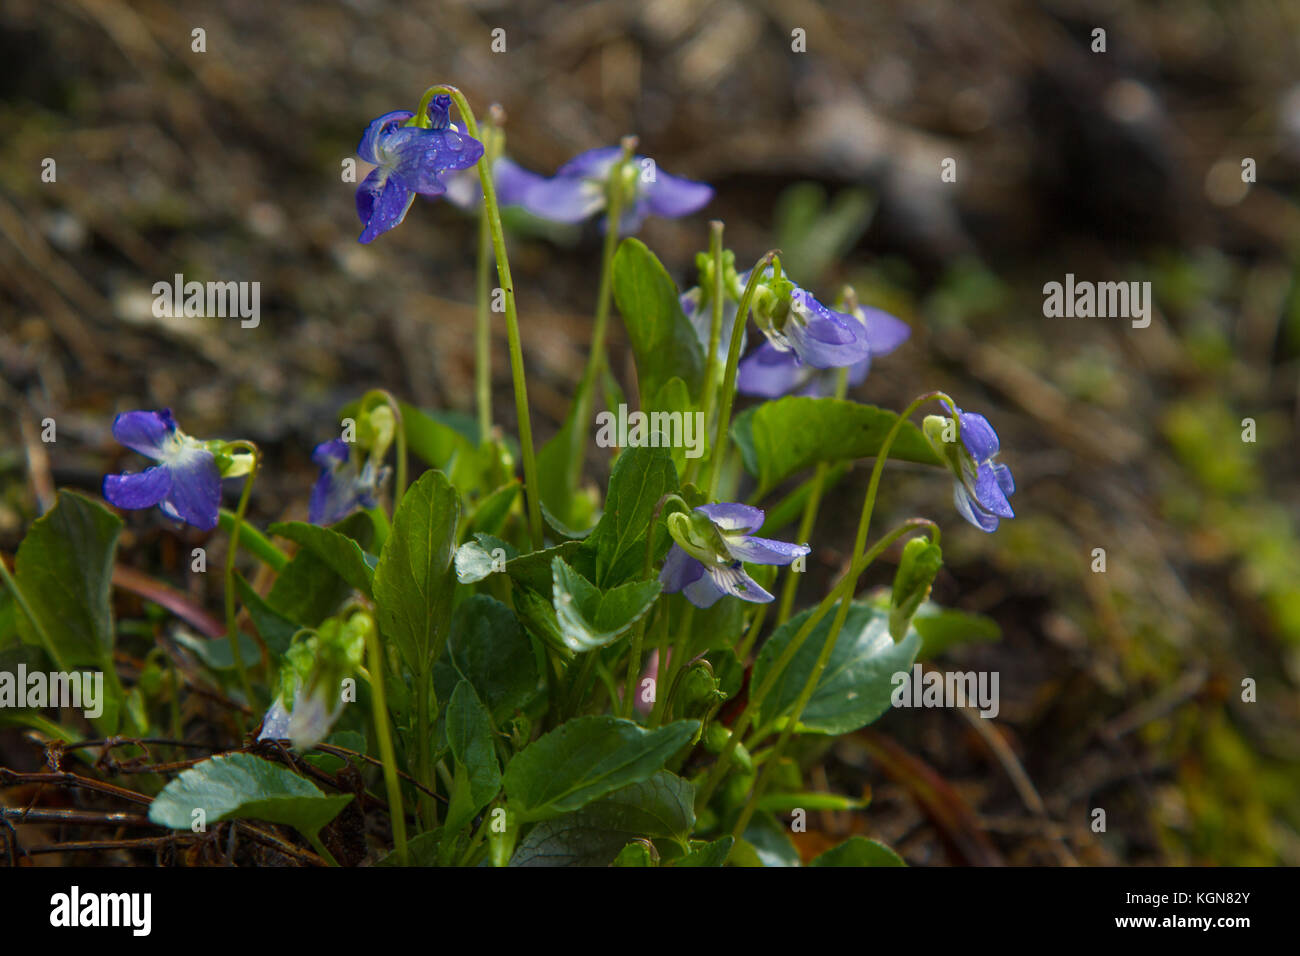 Spring nature common violets background. Viola Odorata flowers in the garden close up. Selective focus Stock Photo